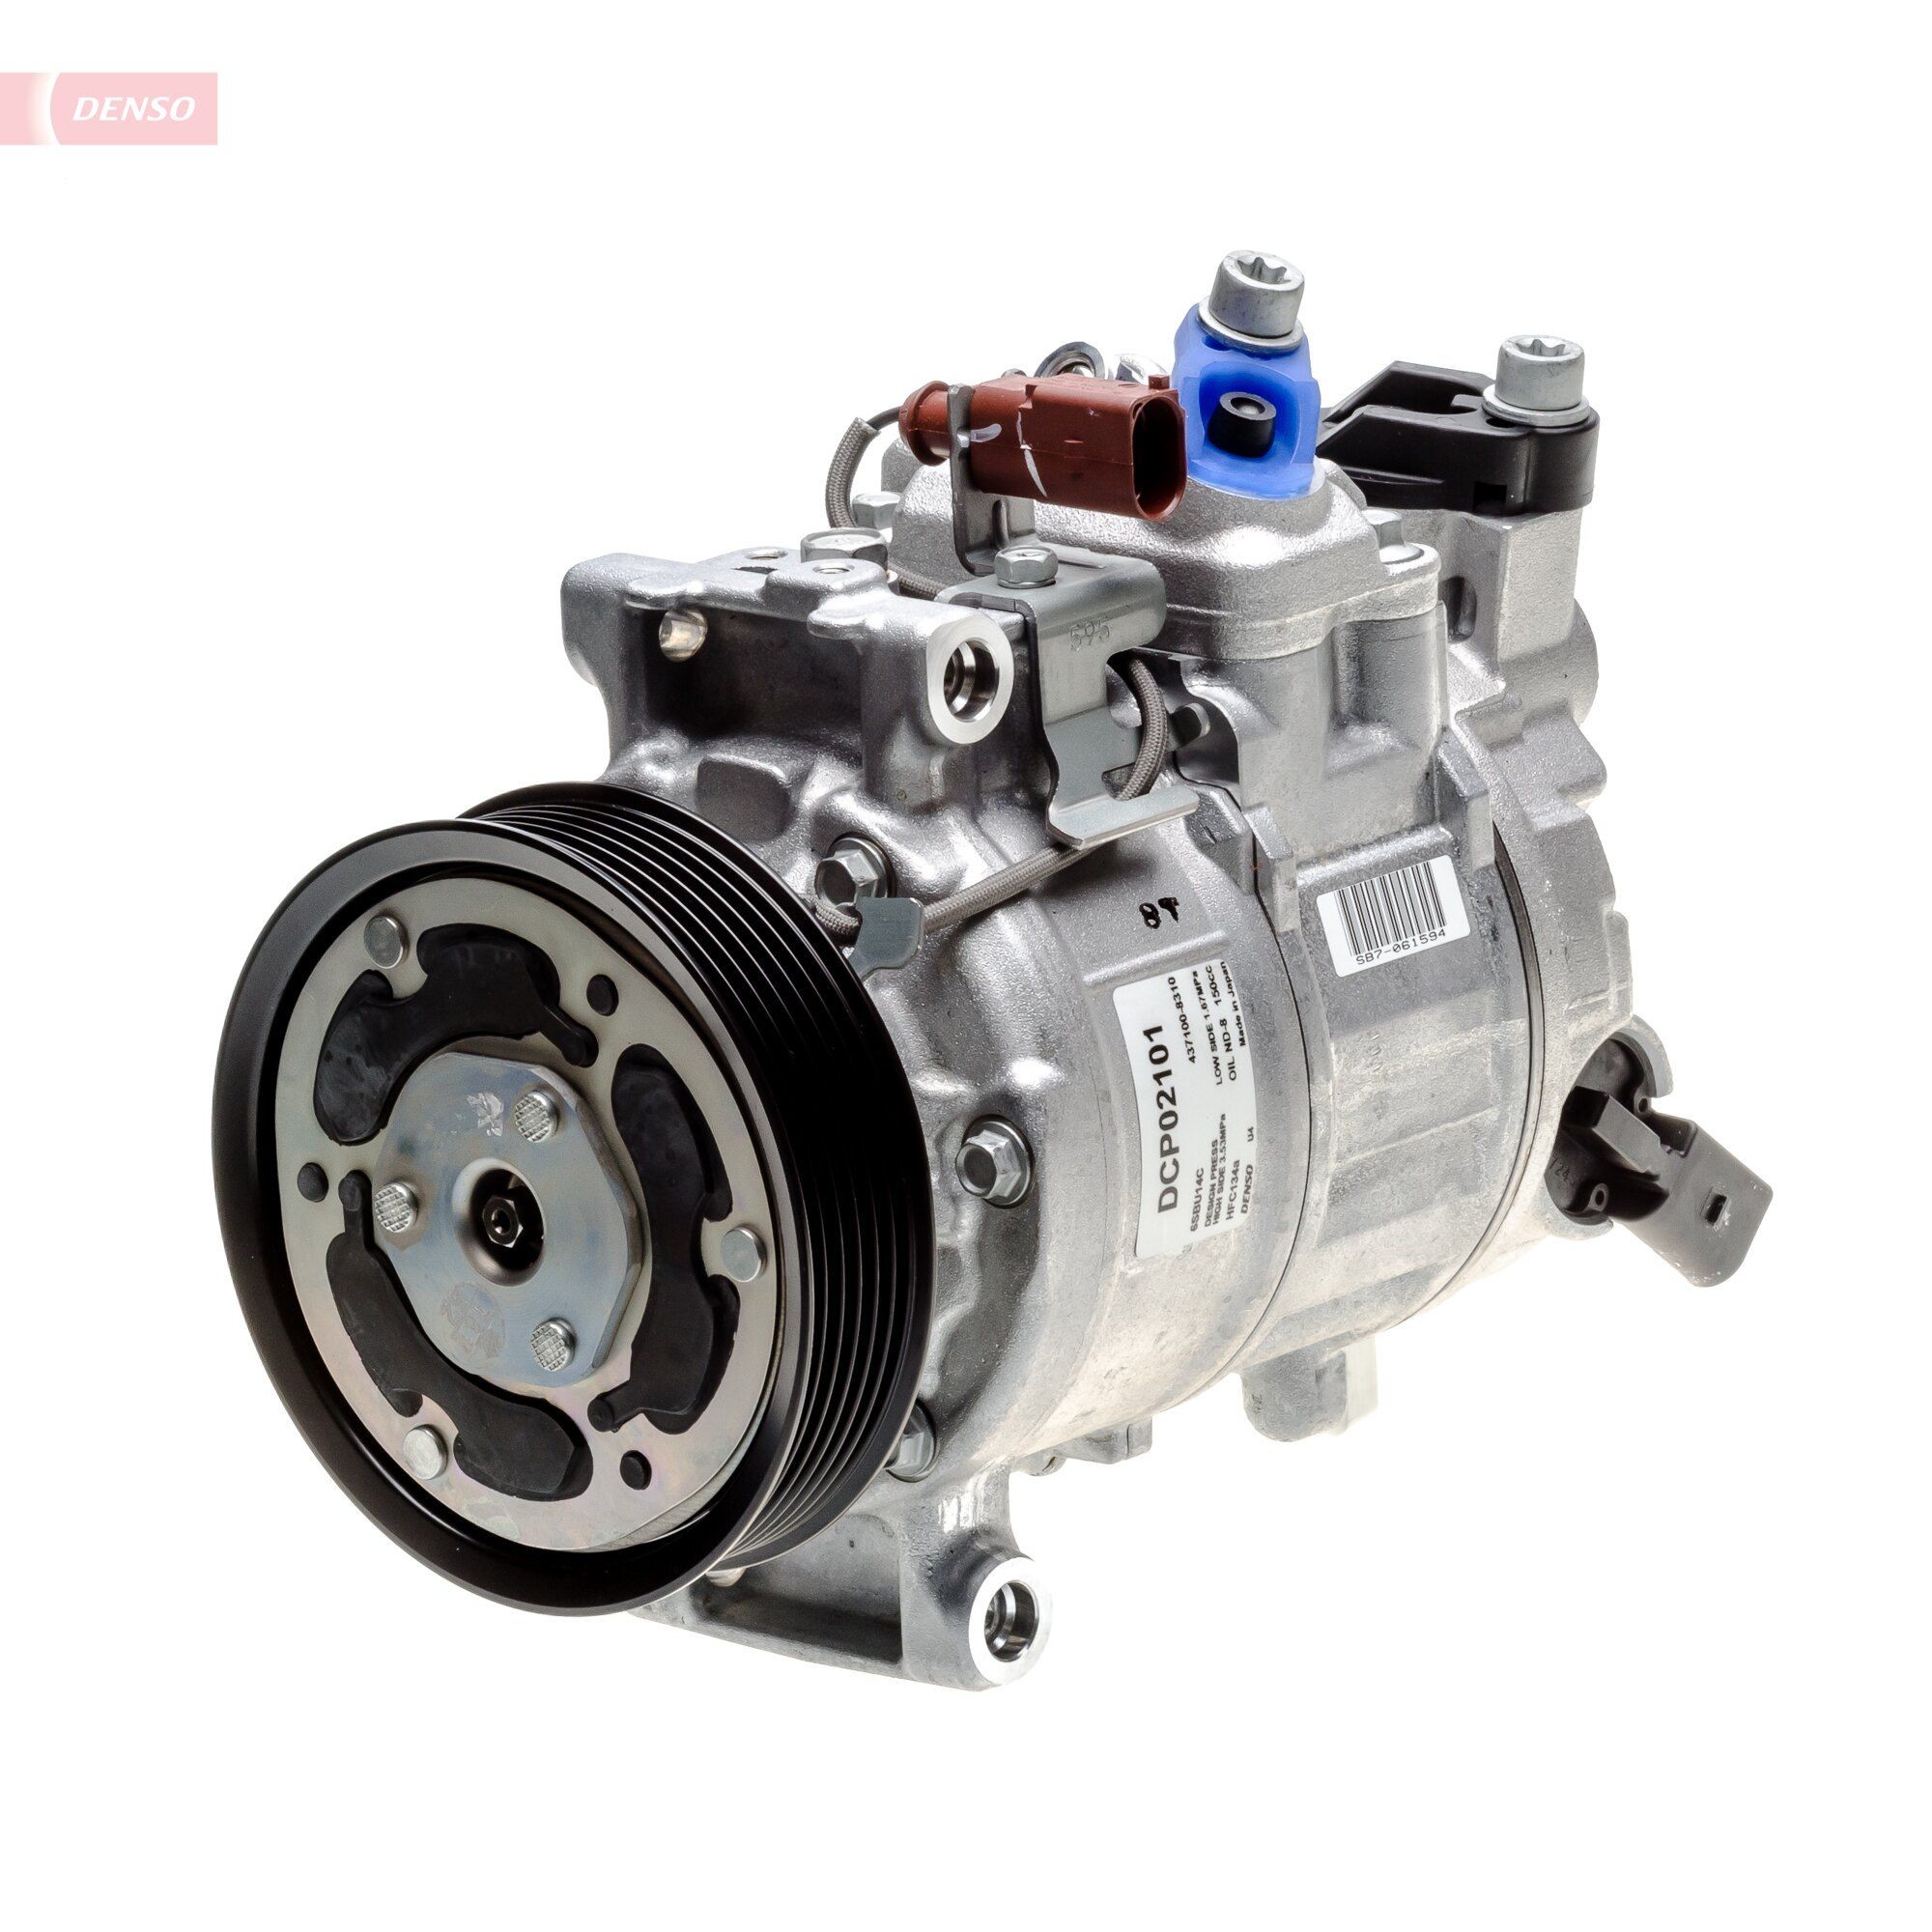 DENSO DCP02101 Air conditioning compressor 6SBU14C, 12V, PAG 46, R 134a, with magnetic clutch